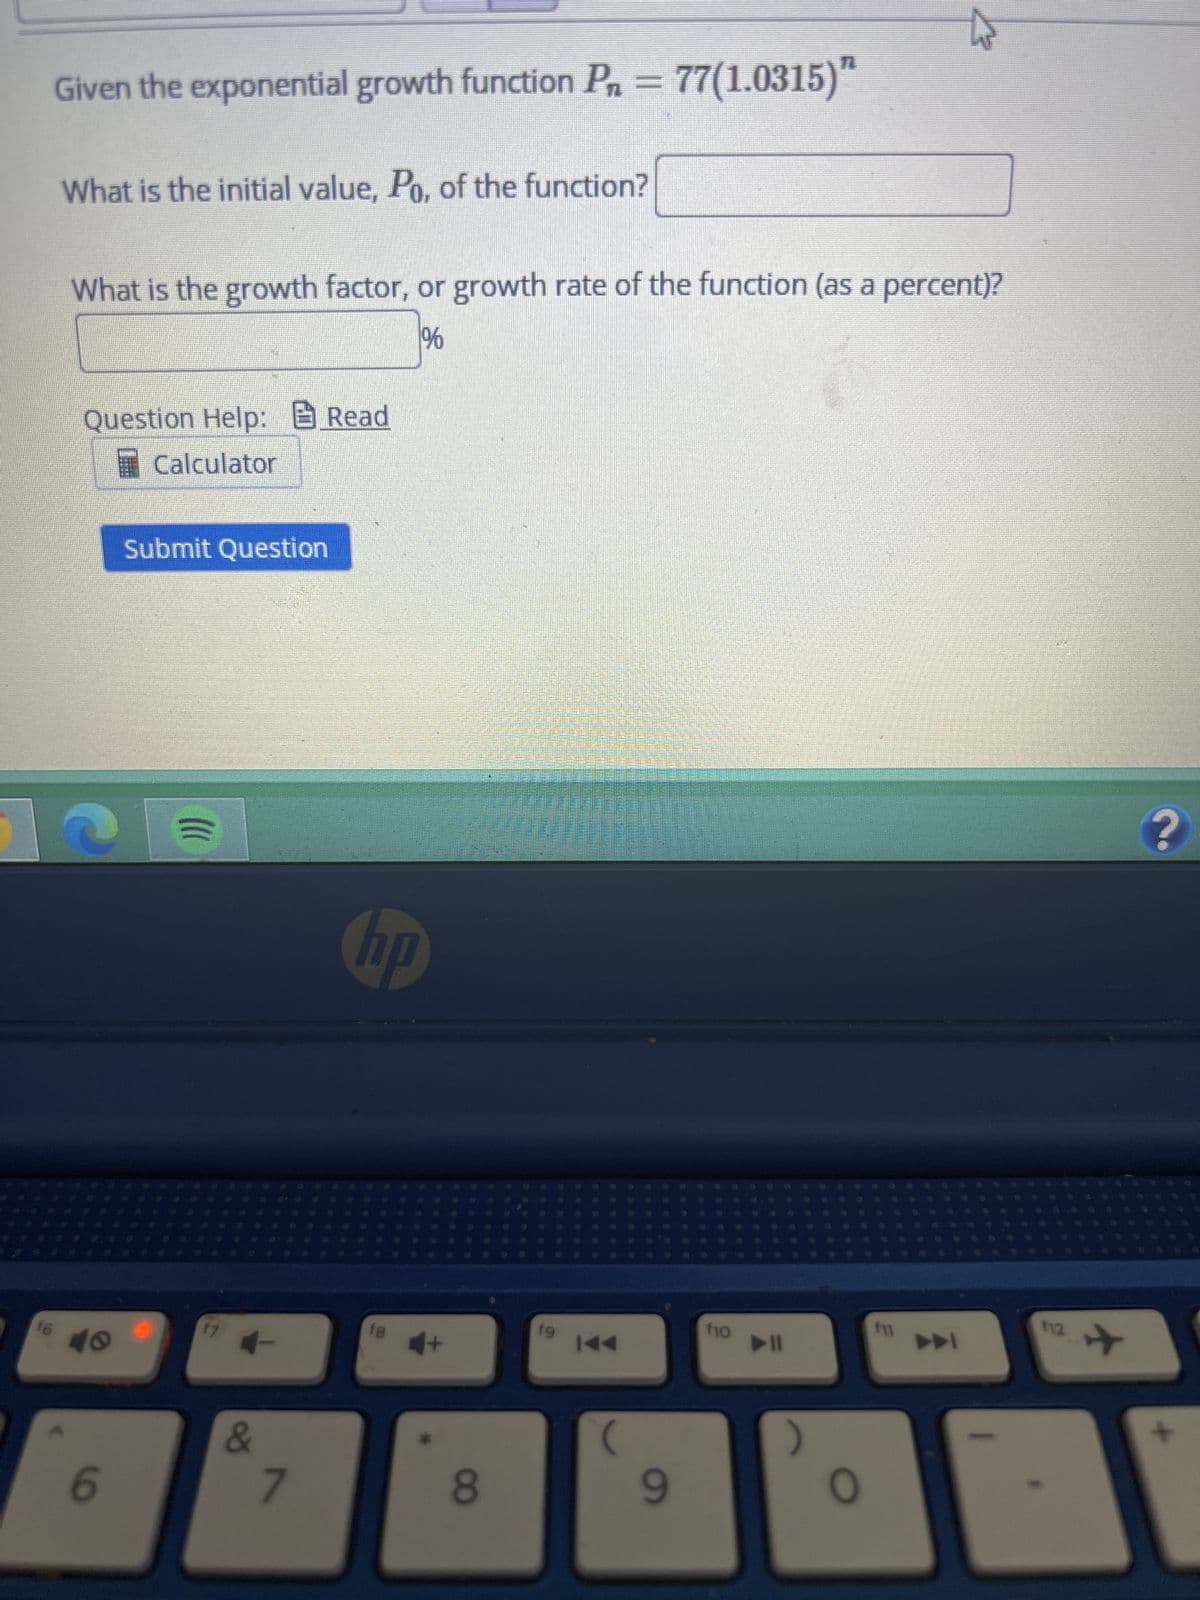 16
t
Given the exponential growth function P₁ = 77(1.0315)"
What is the initial value, Po, of the function?
What is the growth factor, or growth rate of the function (as a percent)?
%
Question Help: Read
Calculator
Submit Question
40
6
()))
=
17
+
&
7
NO
18
4+
*
8
19
I◄◄
9
f10
O
fil
112
?